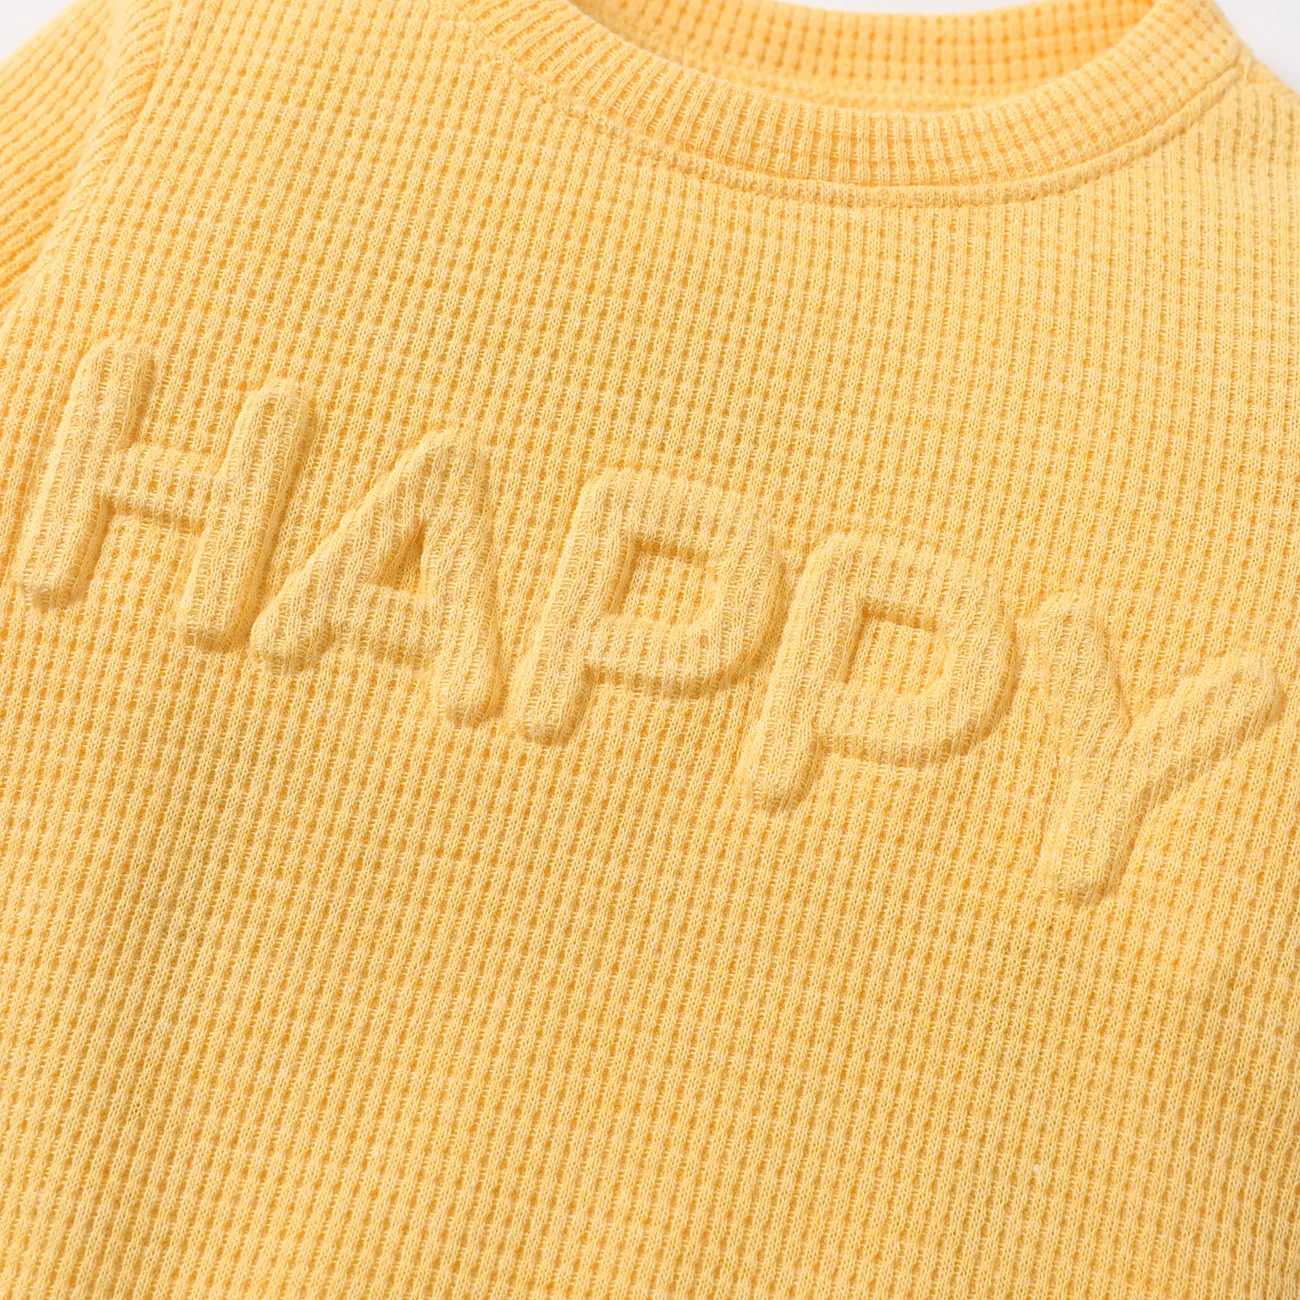 Baby Girl/Boy Hyper-Tactile 3D Letter Long Sleeve Top Yellow big image 1